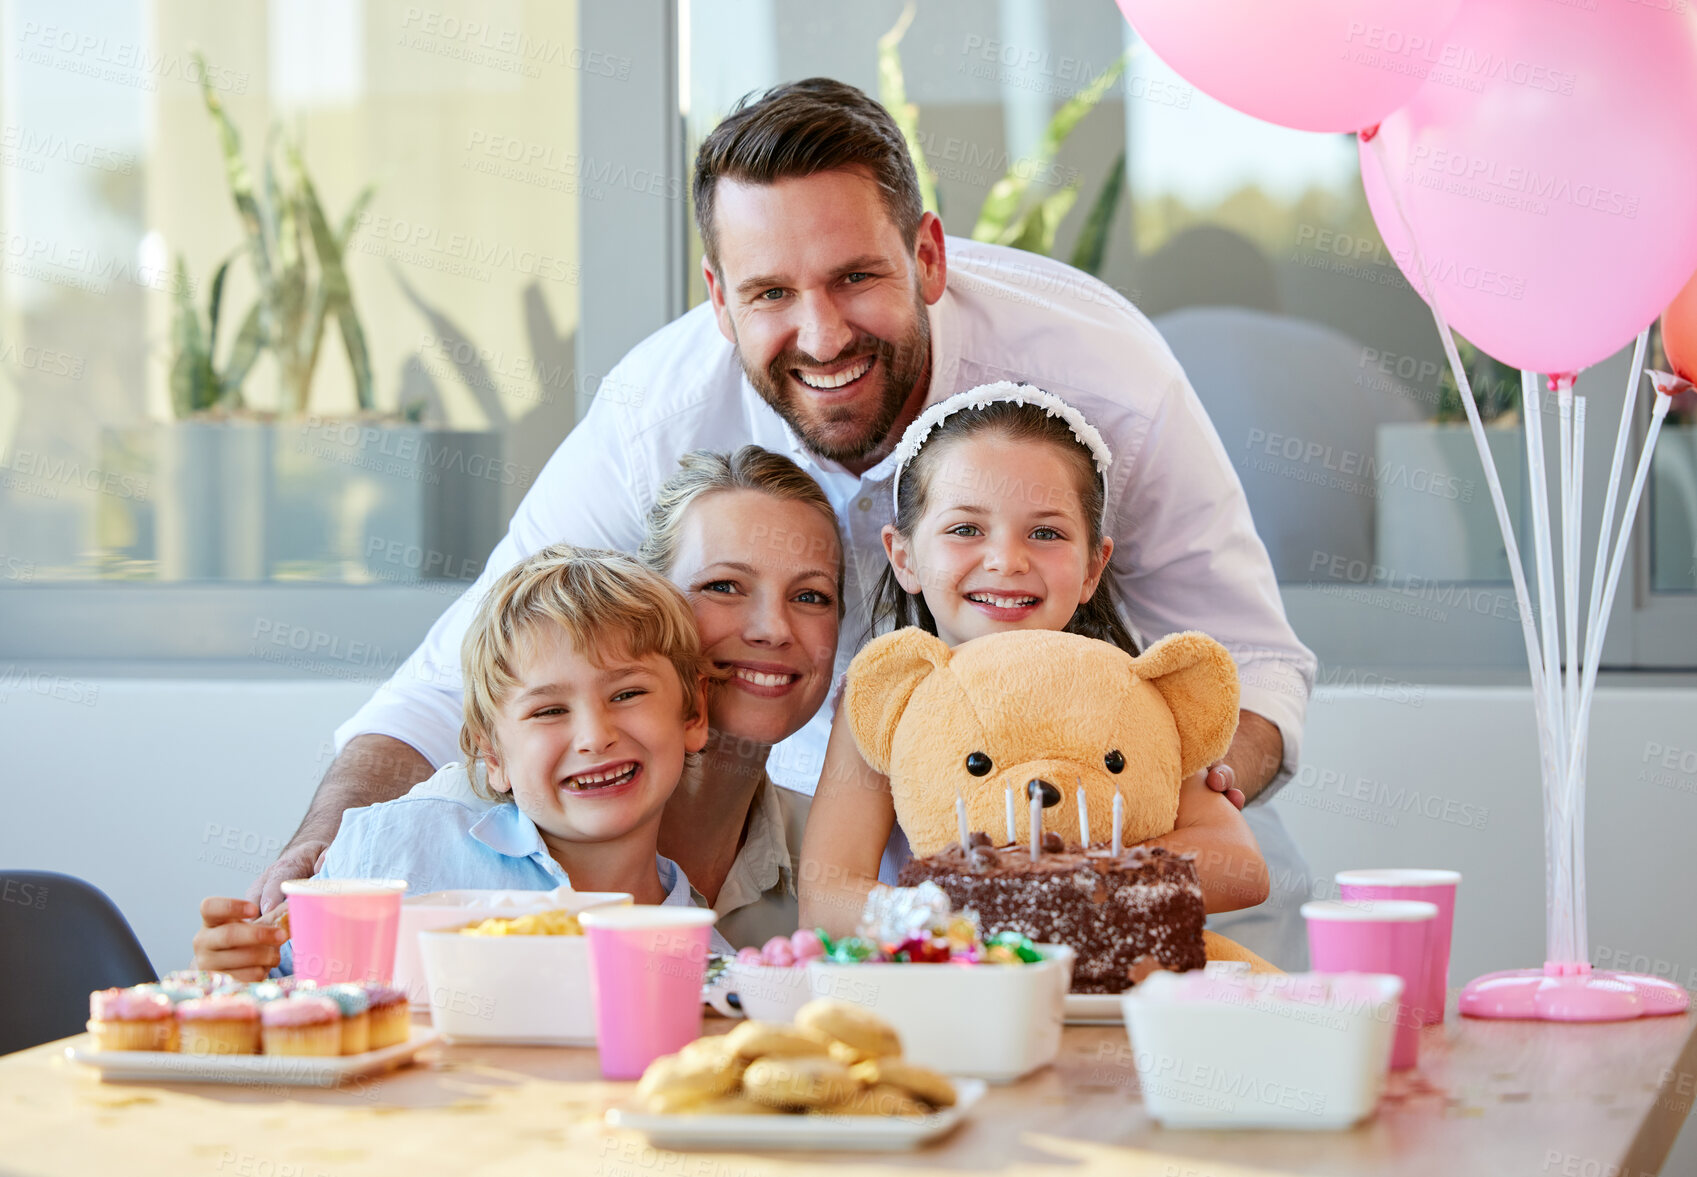 Buy stock photo Parents, children and birthday cake for celebration with candles, love and sweets at home. Happiness, mother and father together at table with happy kids, party and balloons at event at house